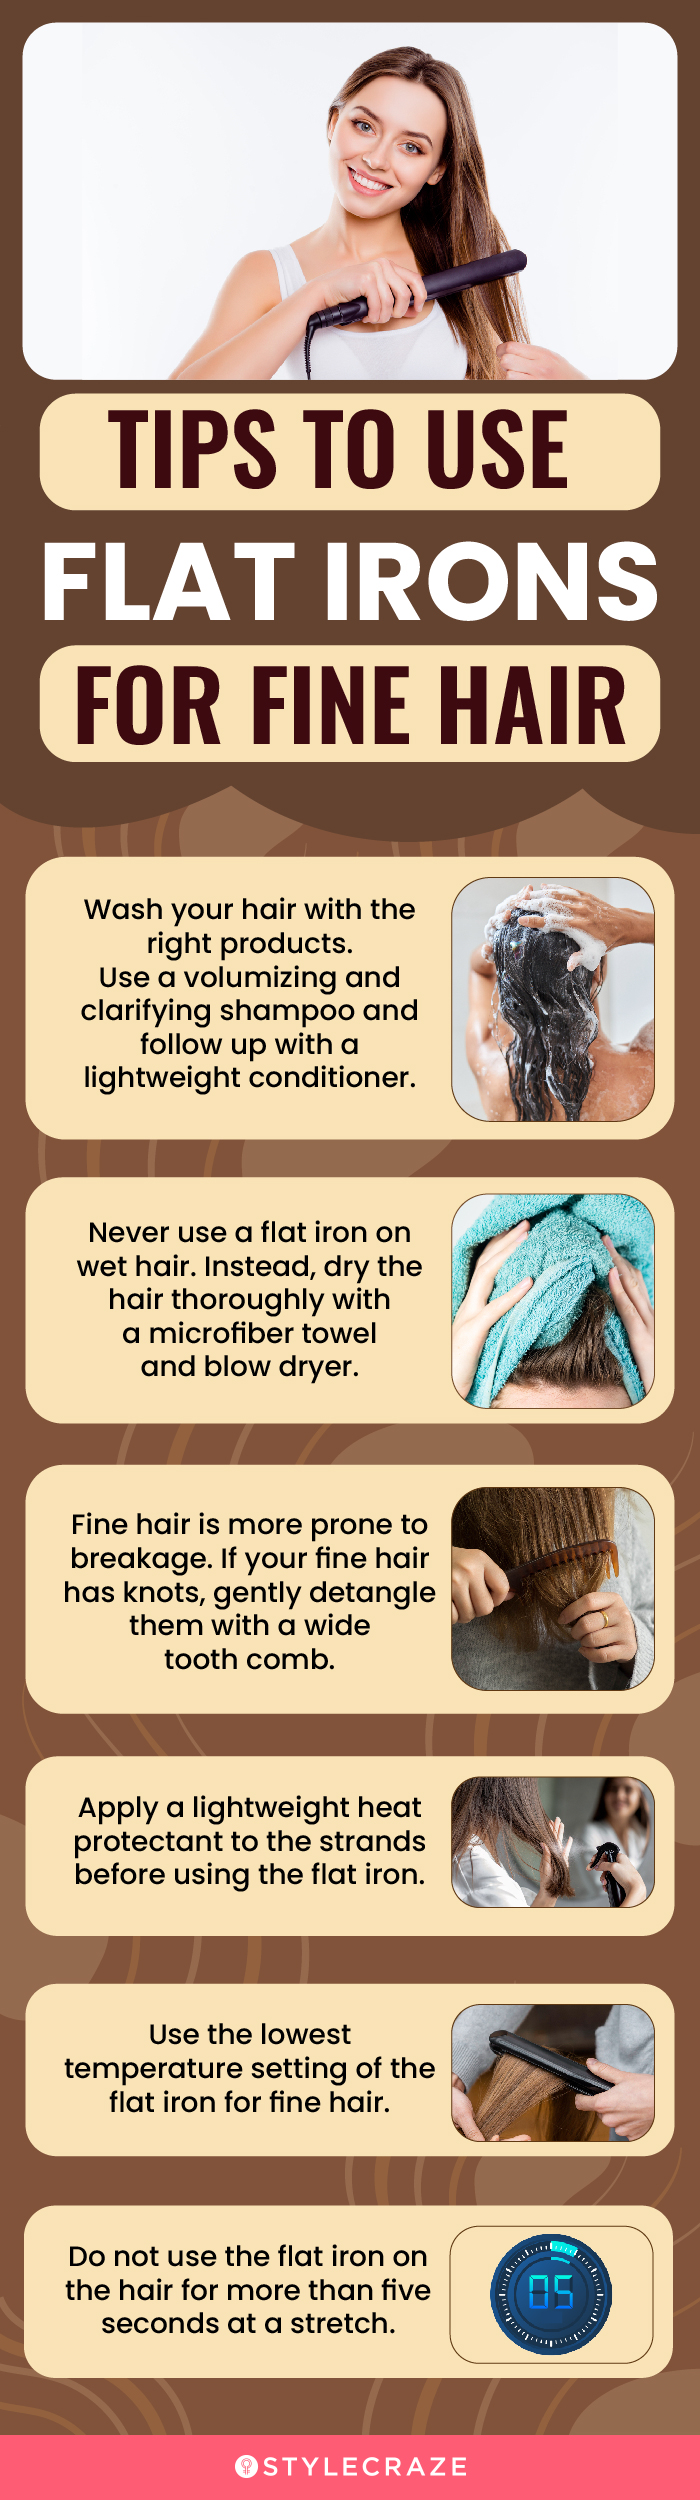 Tips To Use Flat Iron For Fine Hair (infographic)